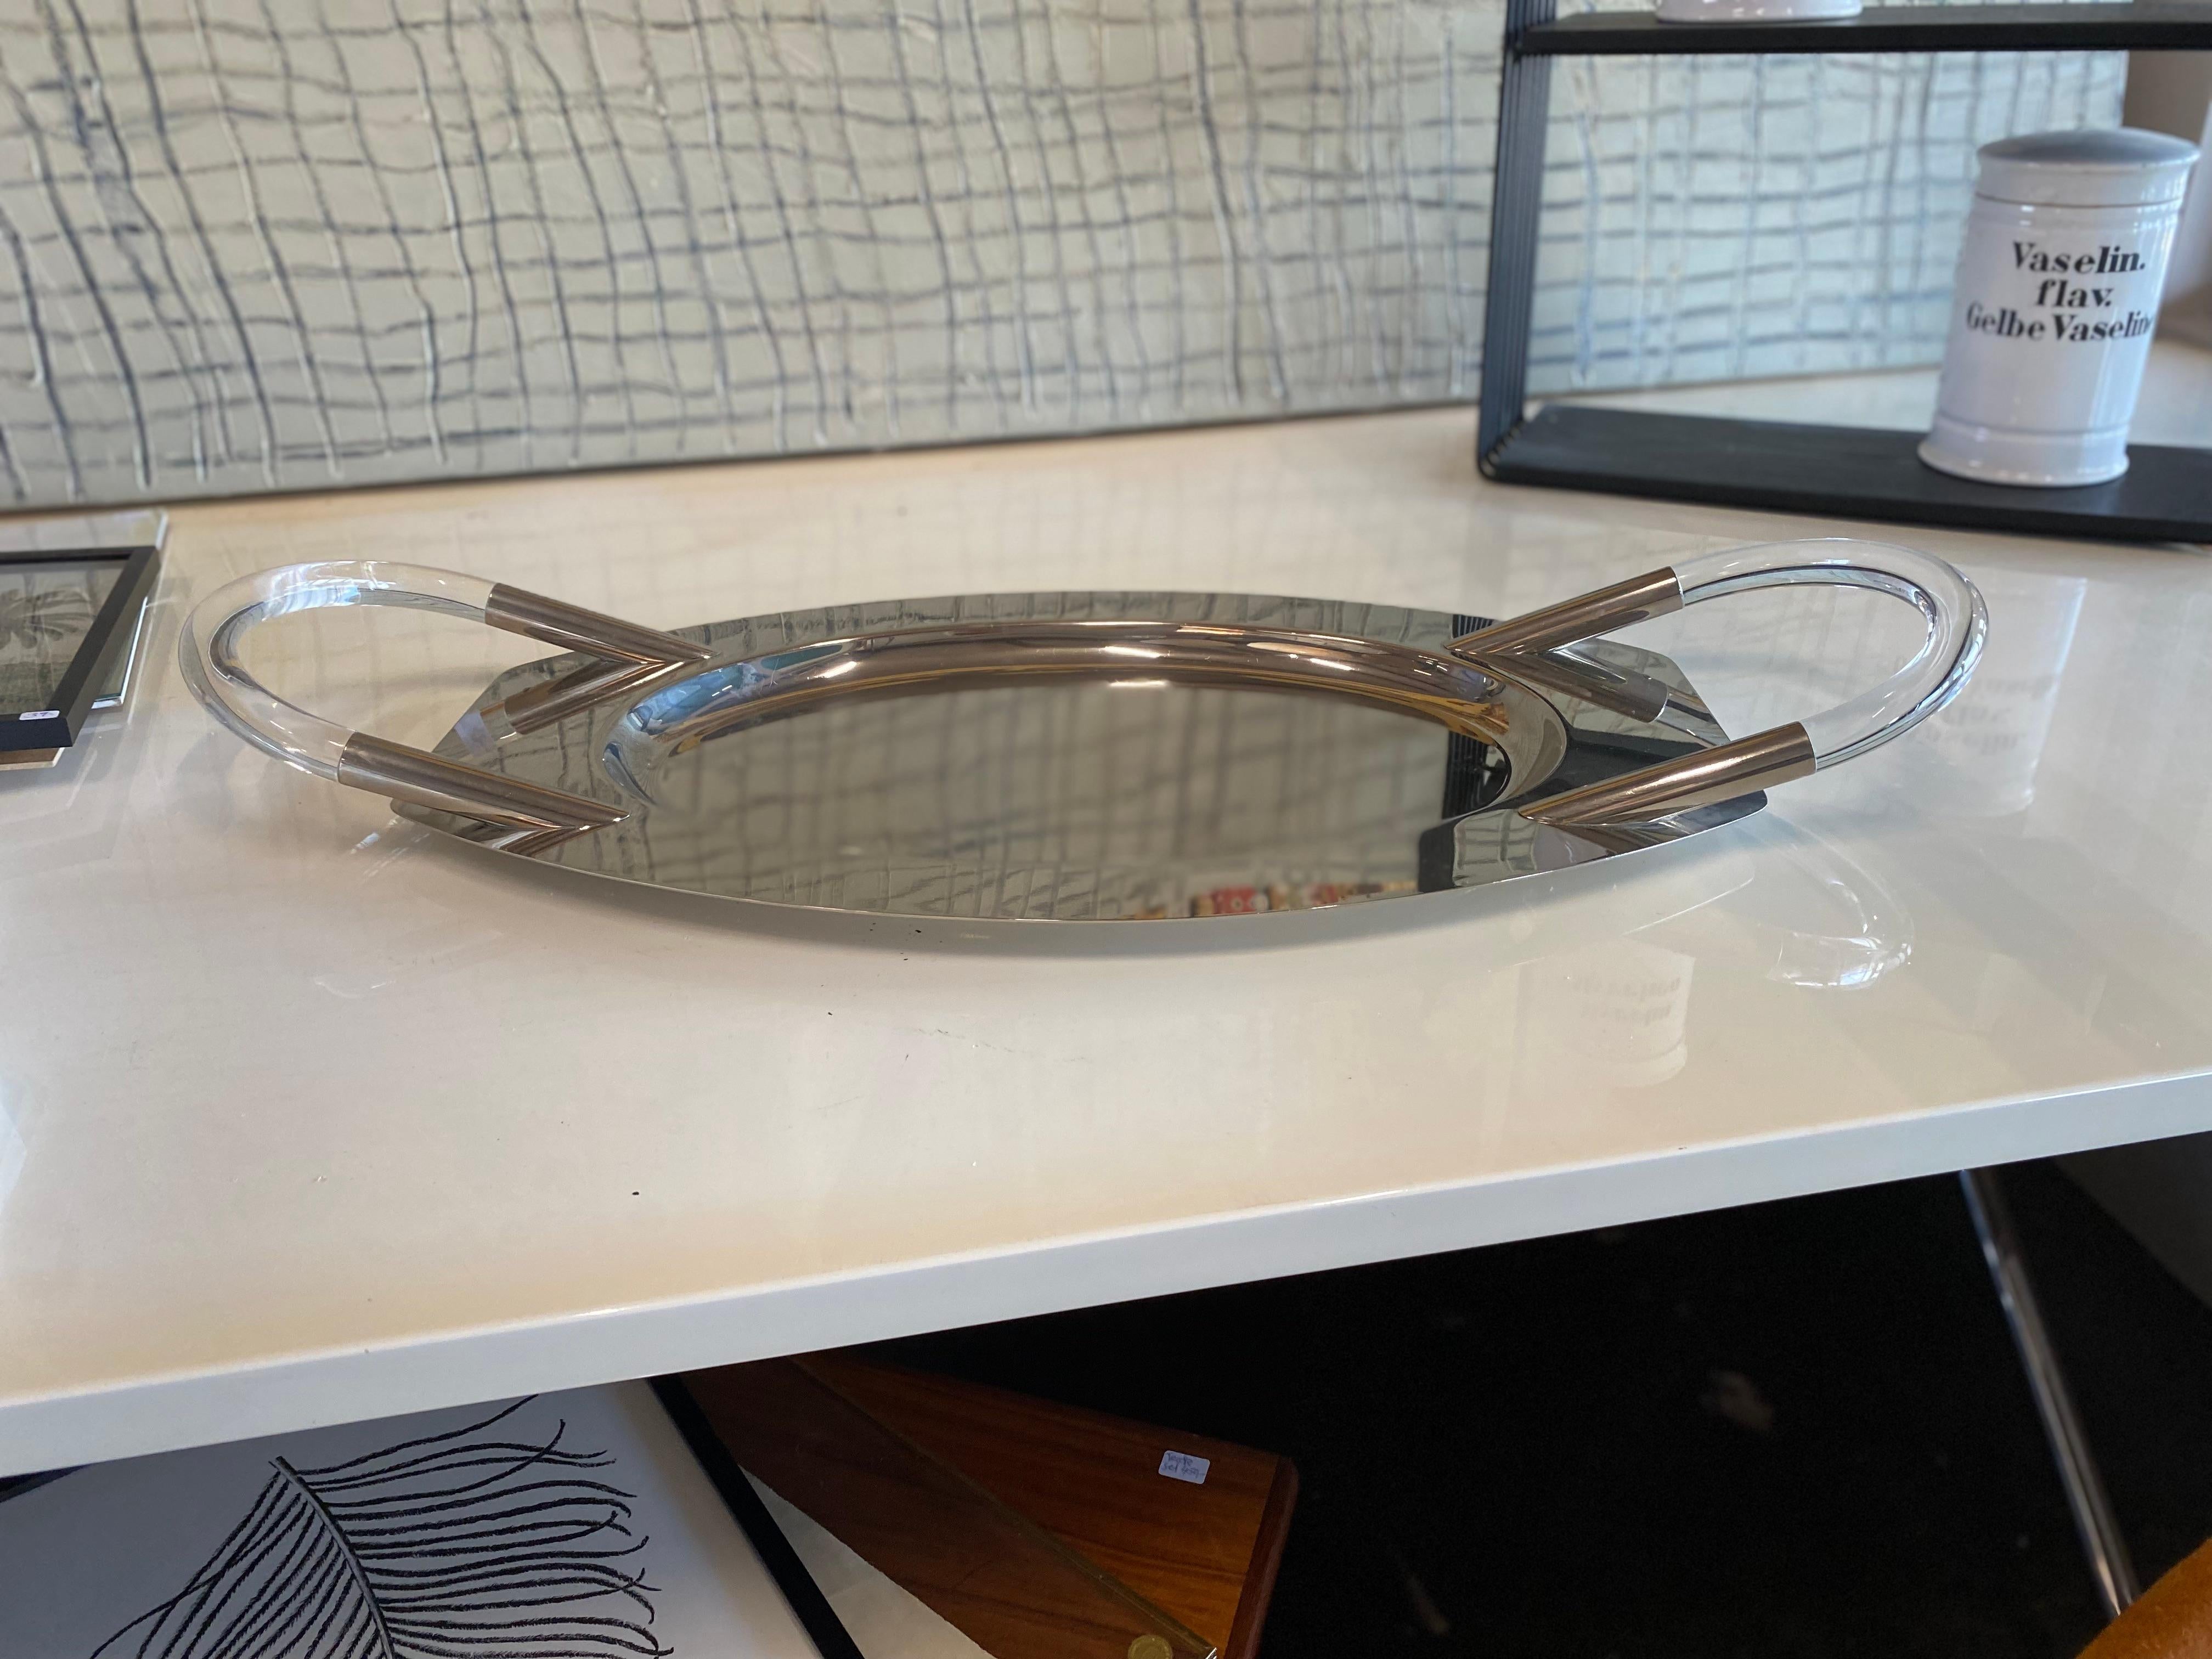 Hollywood Regency style large oval tray with acrylic glass handles. The decorative tray dates from around the late 1970s-early 1980s. It is made of chromed metal, the inserted and screwed handles are made of curved acrylic glass. The tray is in good